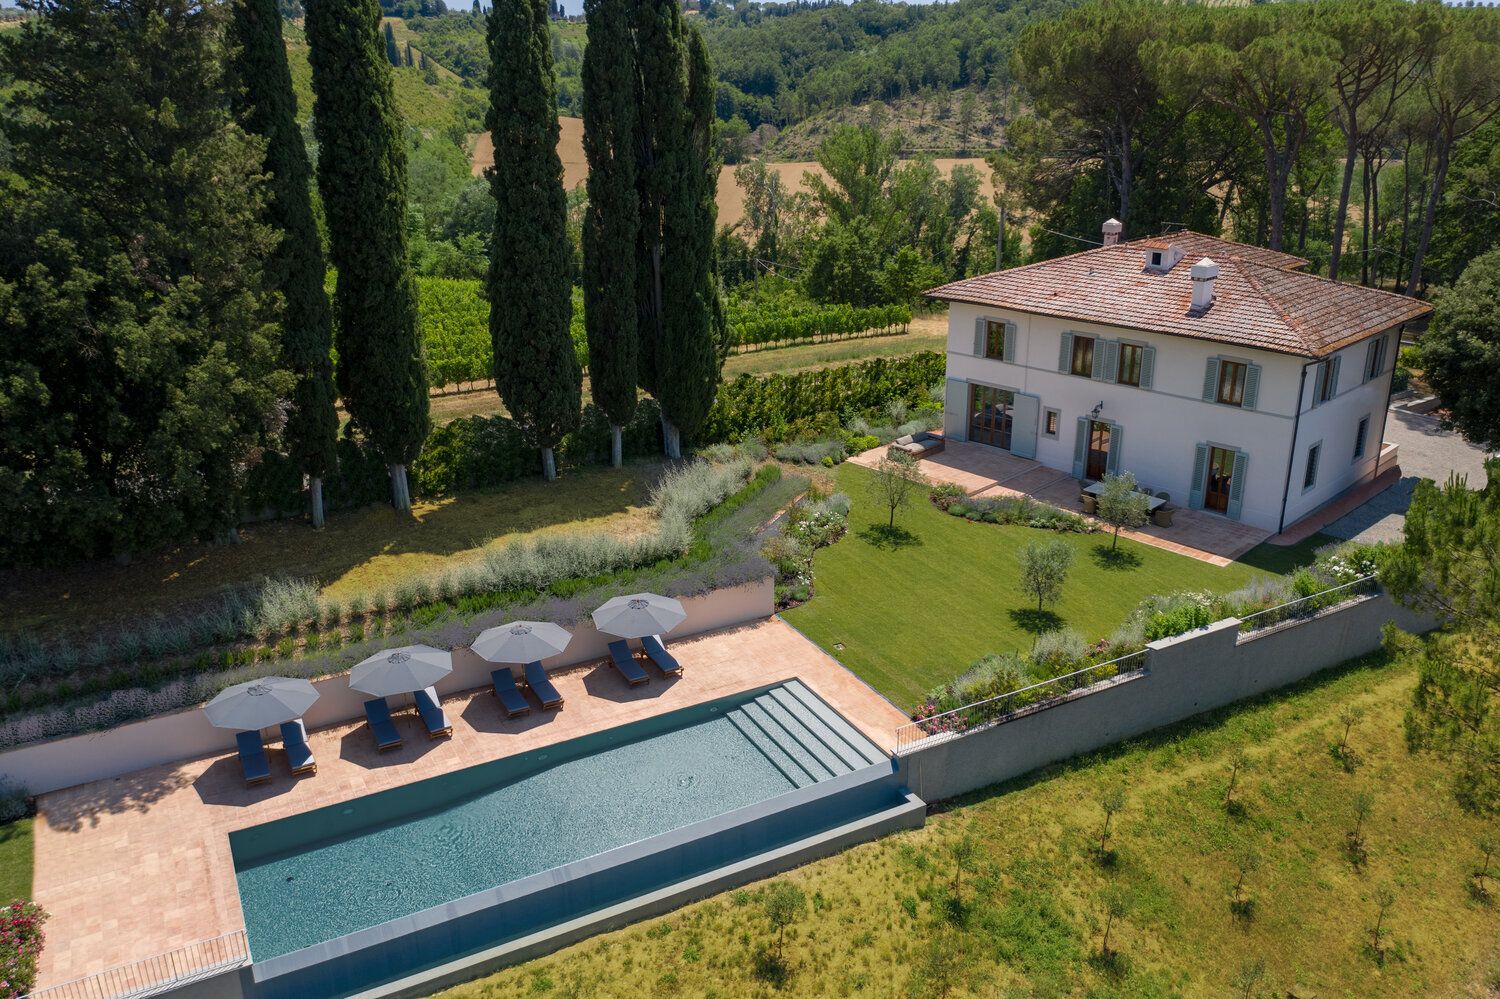 An aerial view of the Tuscan Estate.